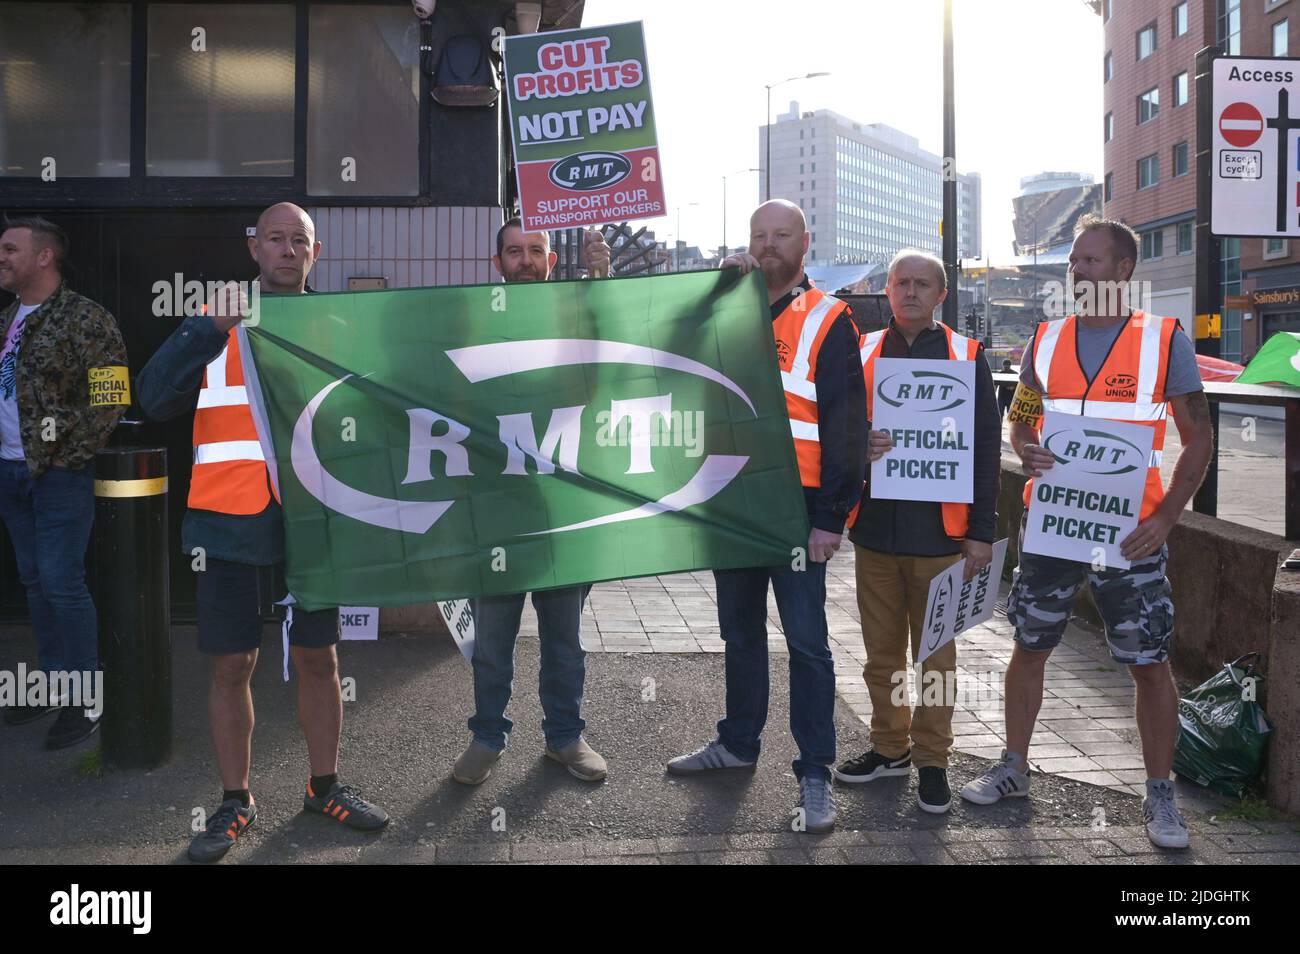 New Street, Birmingham, England, June 21st 2022. Rail workers on the picket line outside Birmingham's New Street Signal Box. They are striking for a 7 percent wage increase across the British networks after RMT Unions failed to reach an agreement. Pic by Credit: Sam Holiday/Alamy Live News Stock Photo